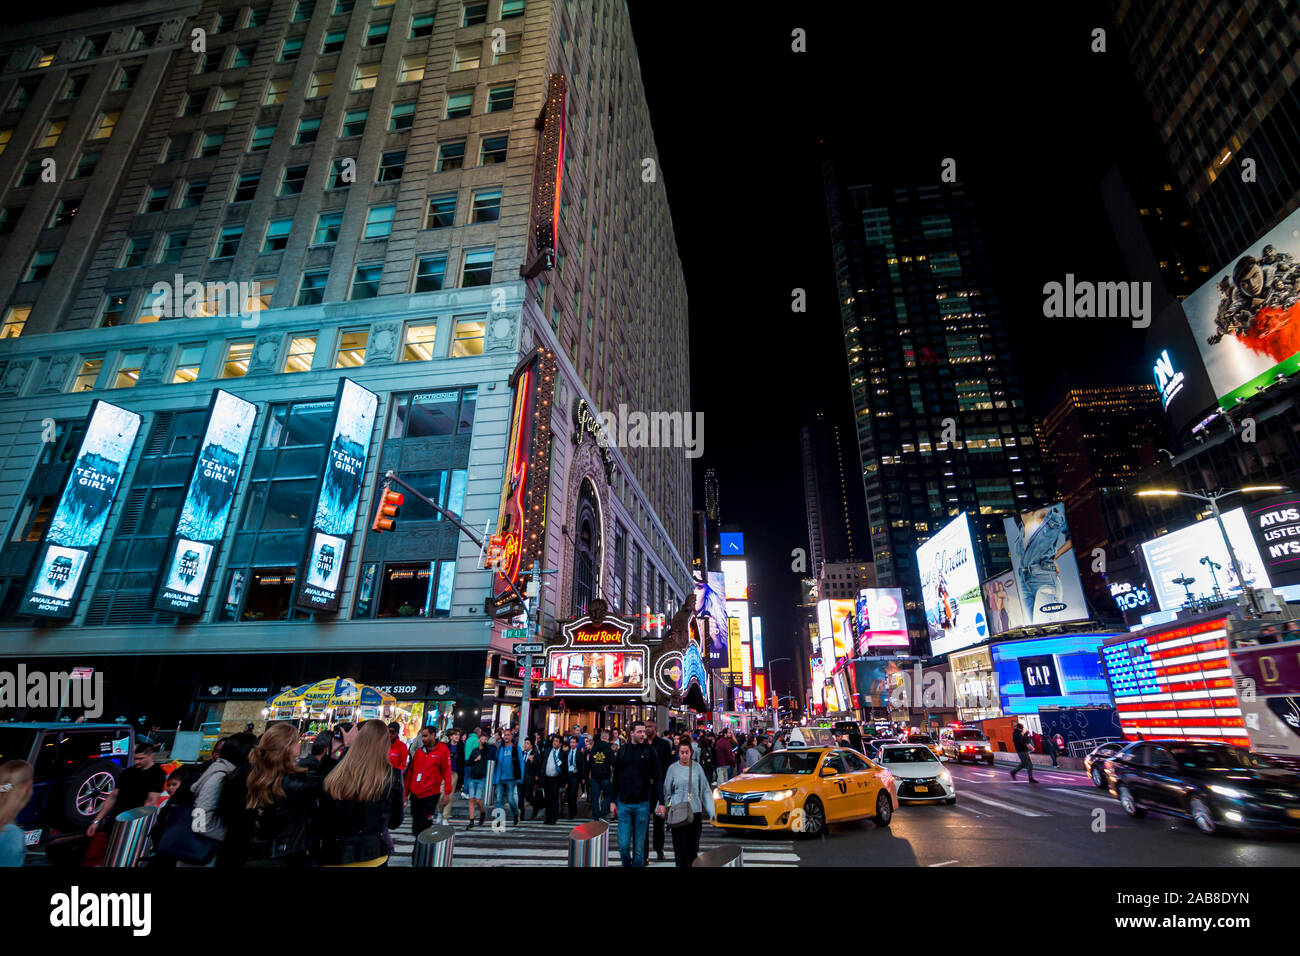 New York city, United States: October 15, 2019: Times Square, a busy and crowded intersection in Manhattan, with many neon ads in an iconic street of Stock Photo